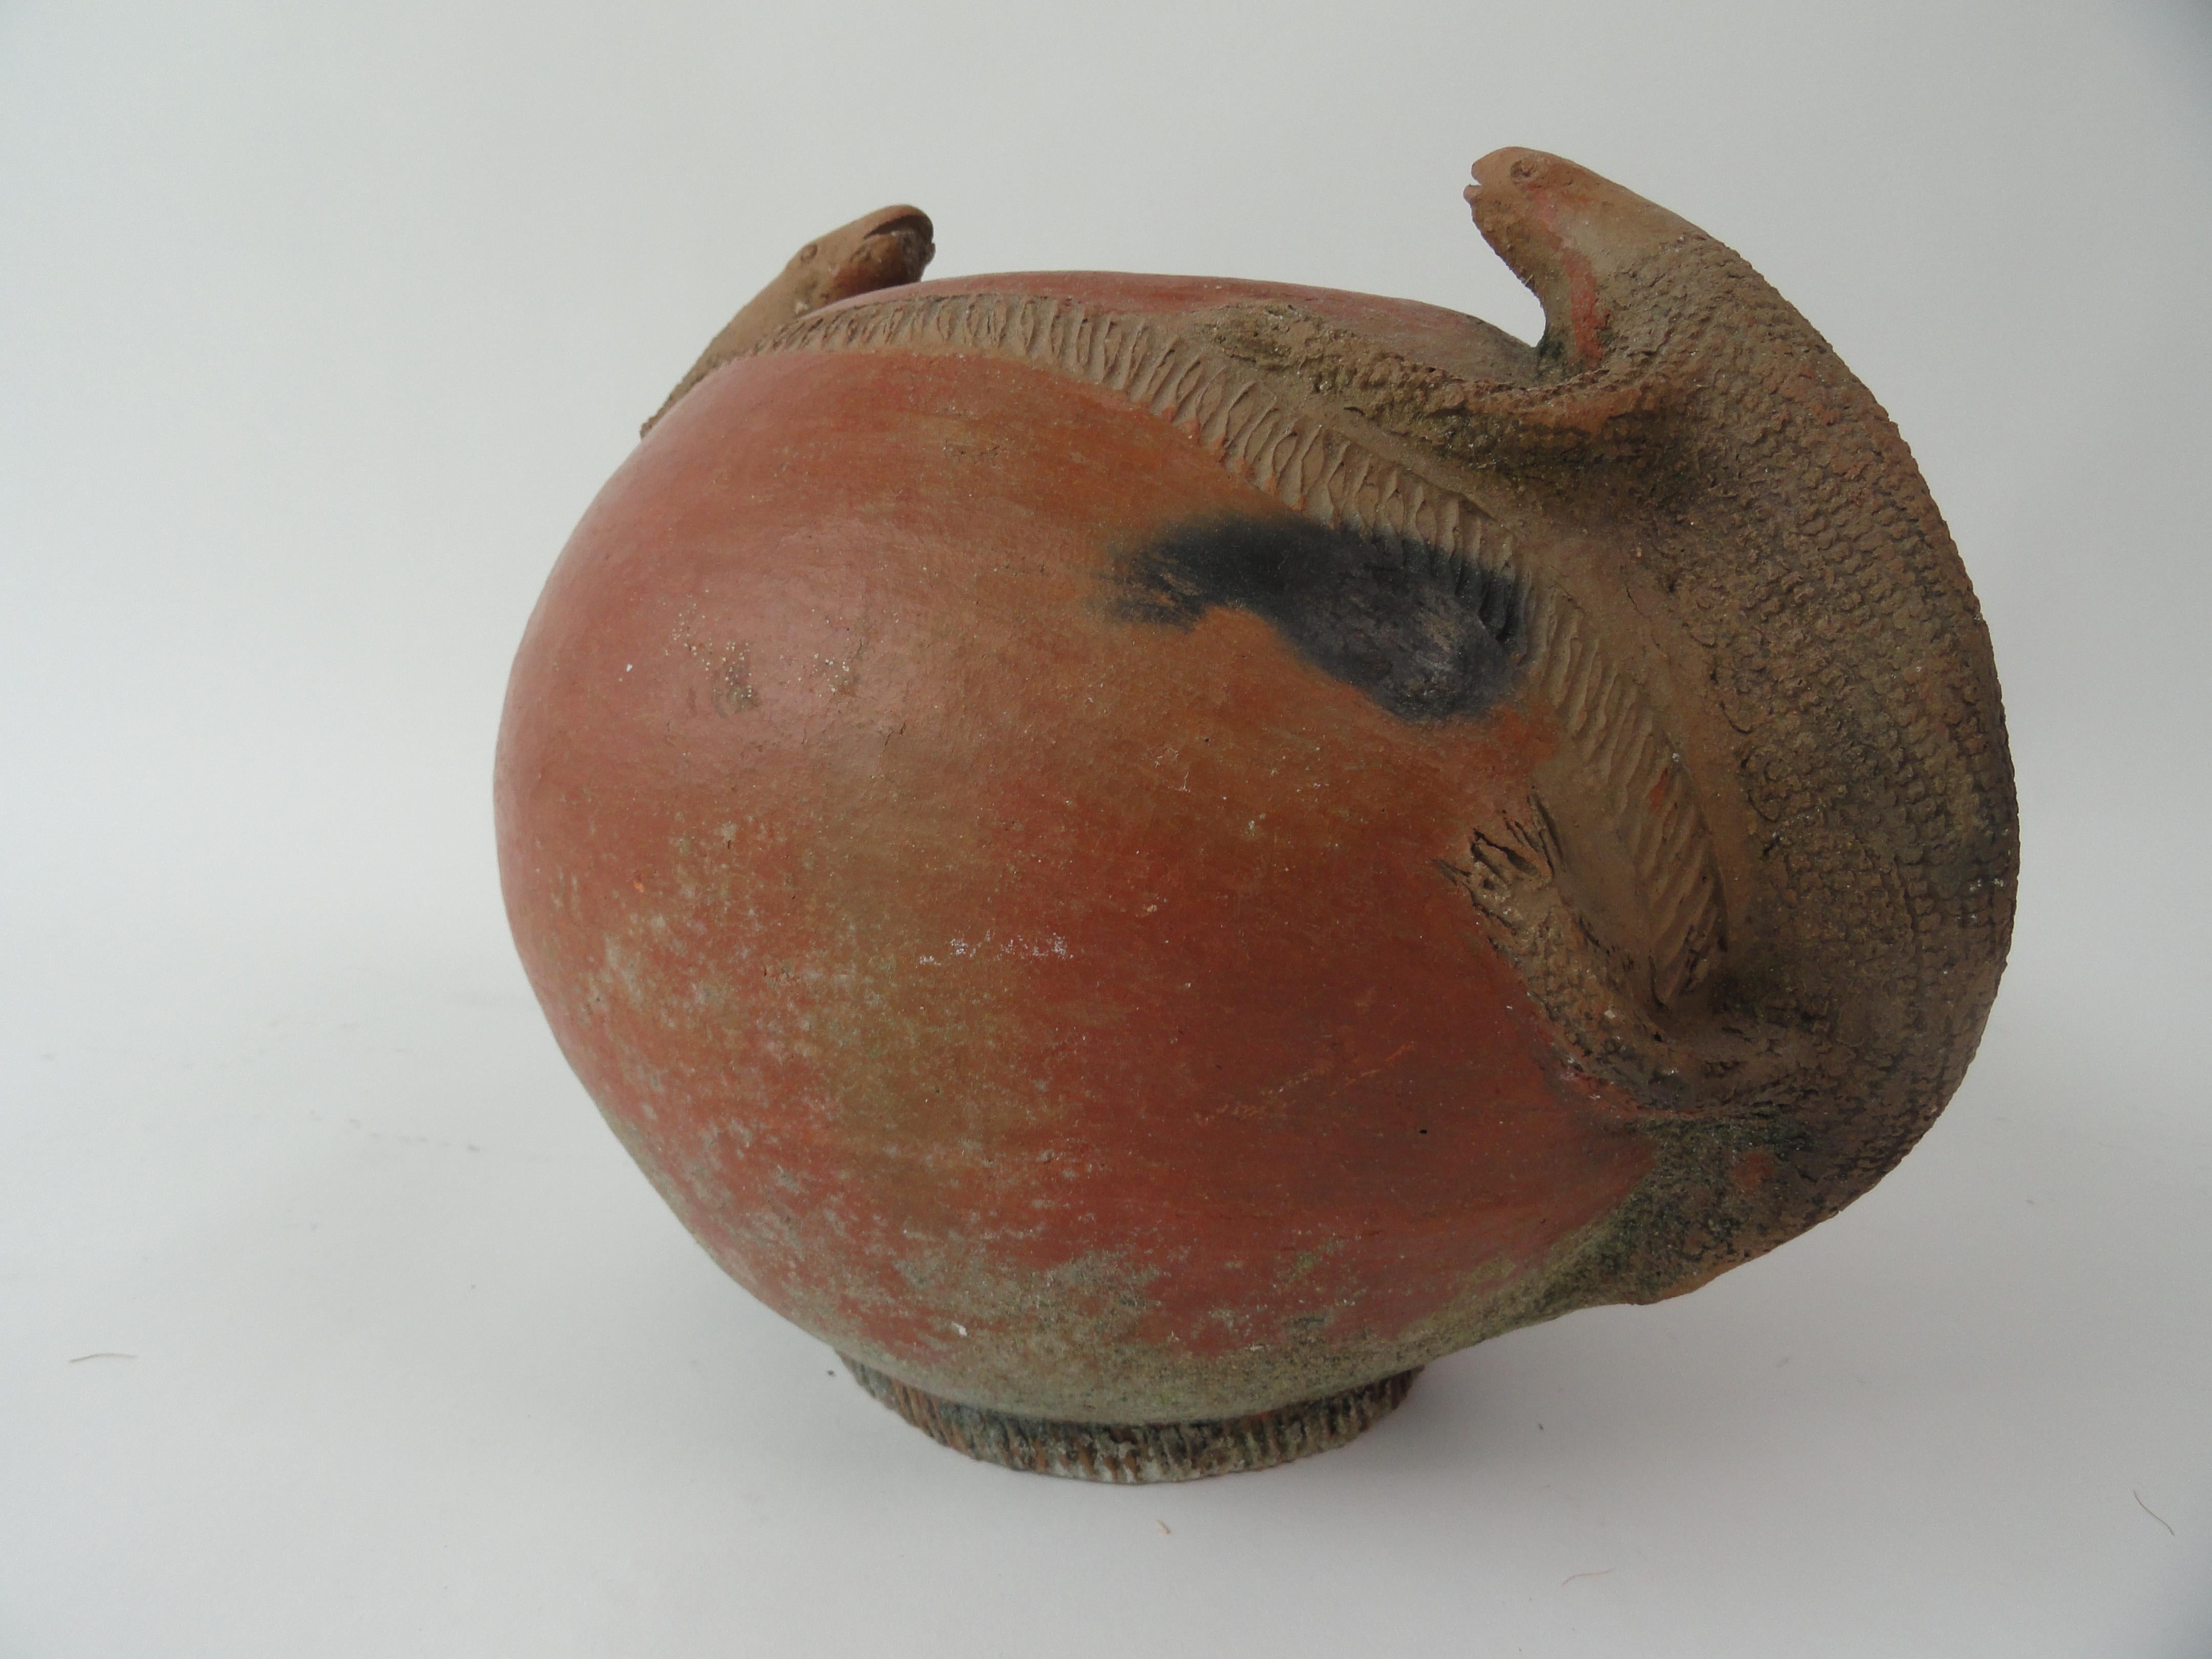 1980s African clay bowl with lizard handles.
Measures: 14